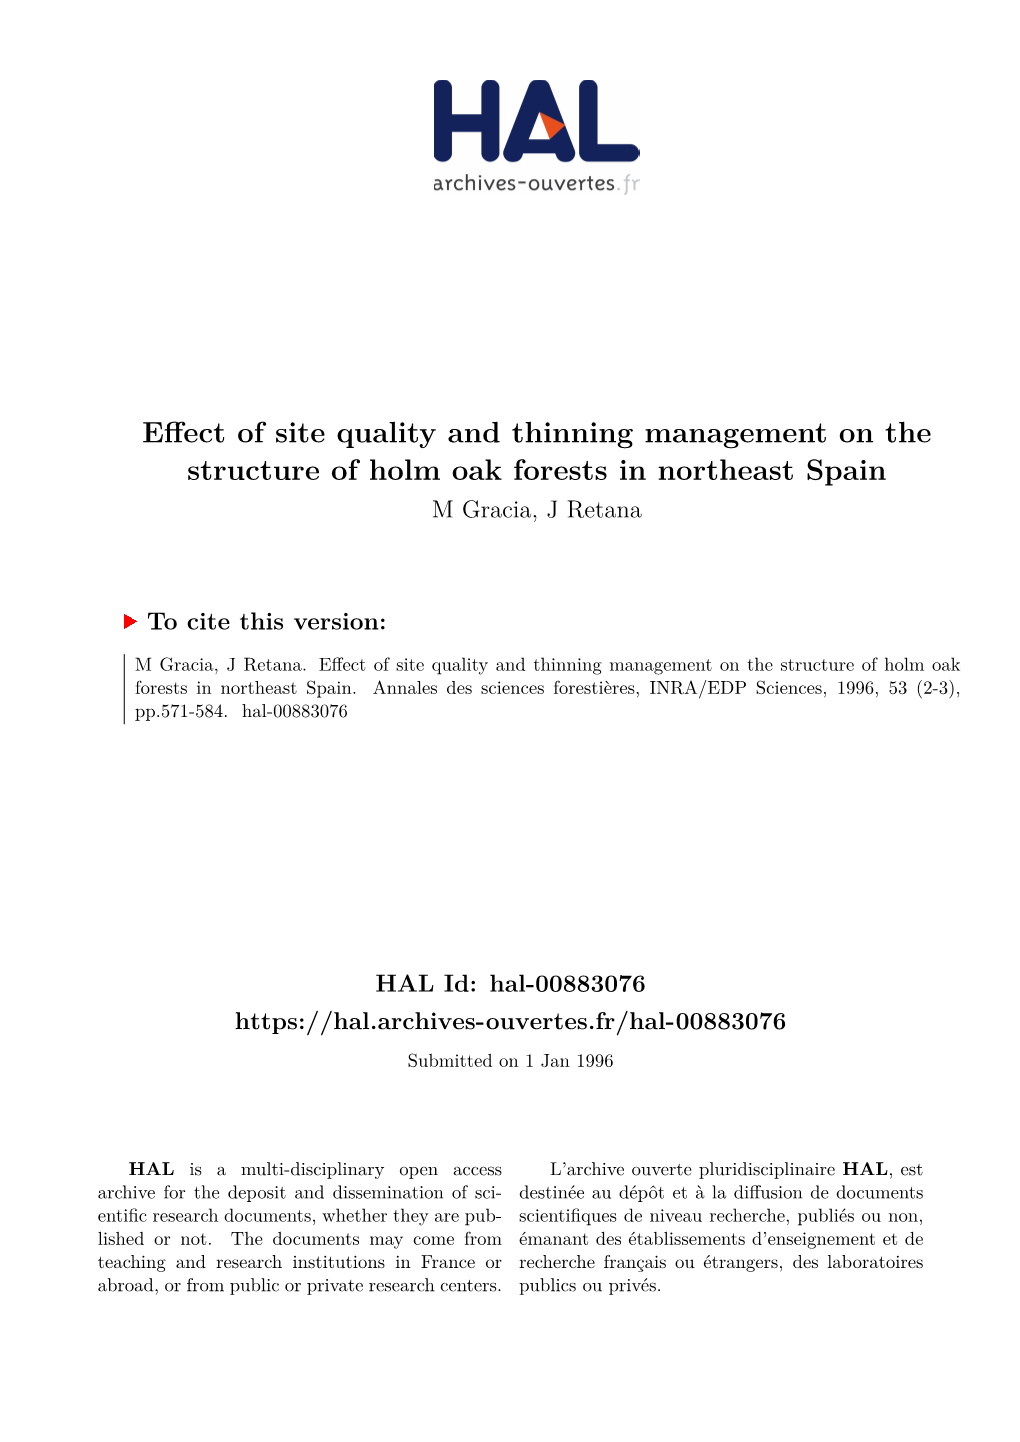 Effect of Site Quality and Thinning Management on the Structure Ofholmoak Forests in Northeast Spain